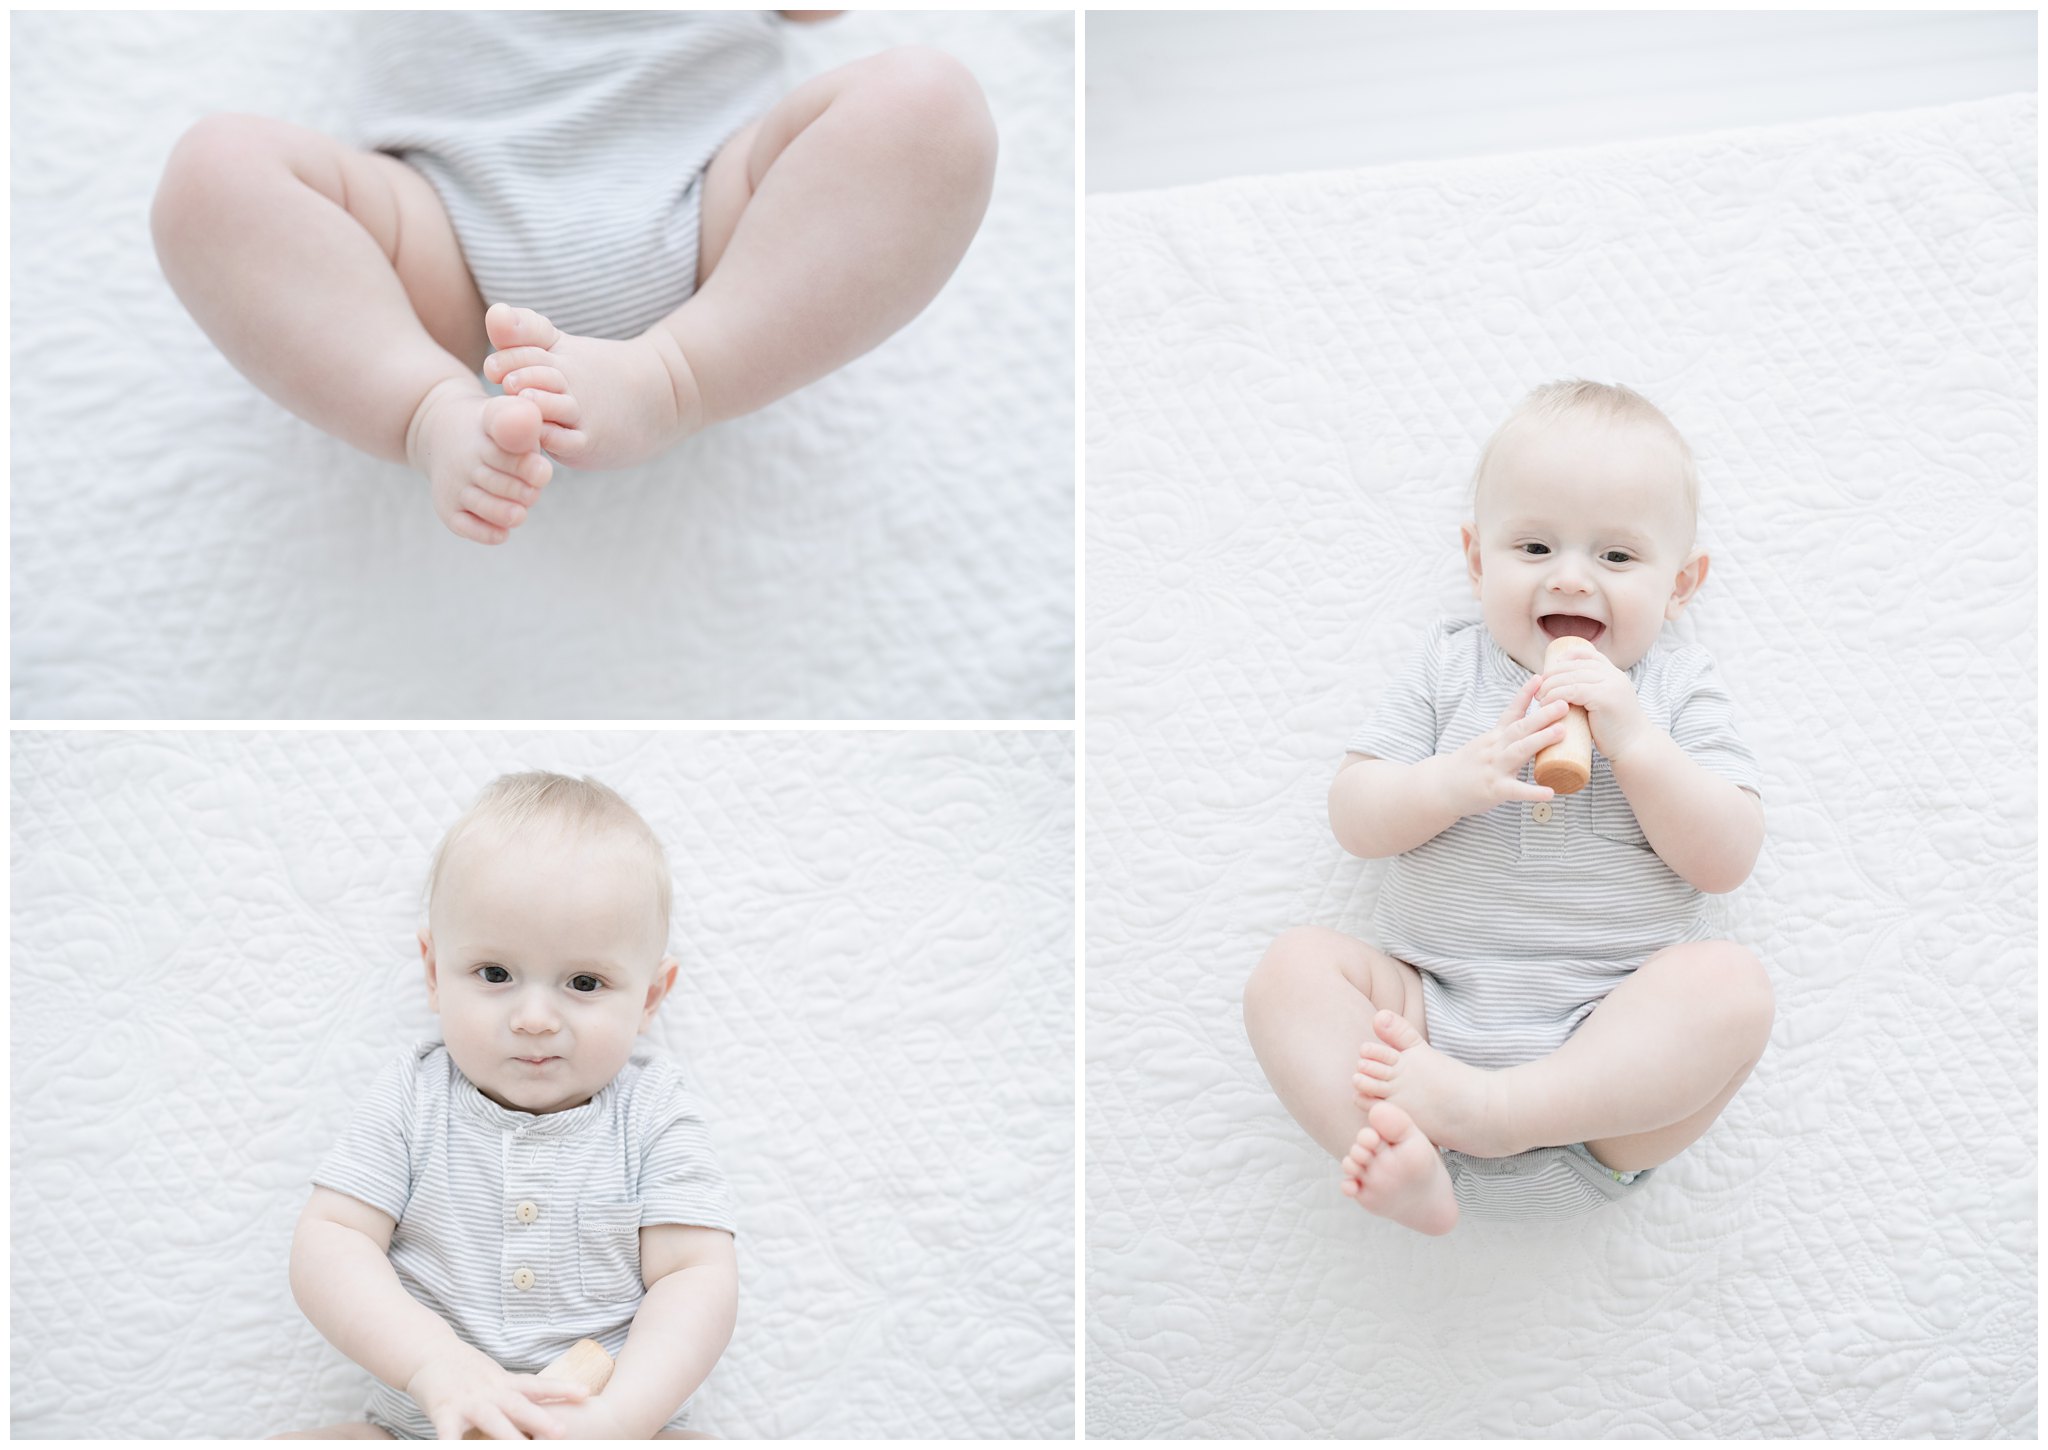 6 months photos with chunky baby legs